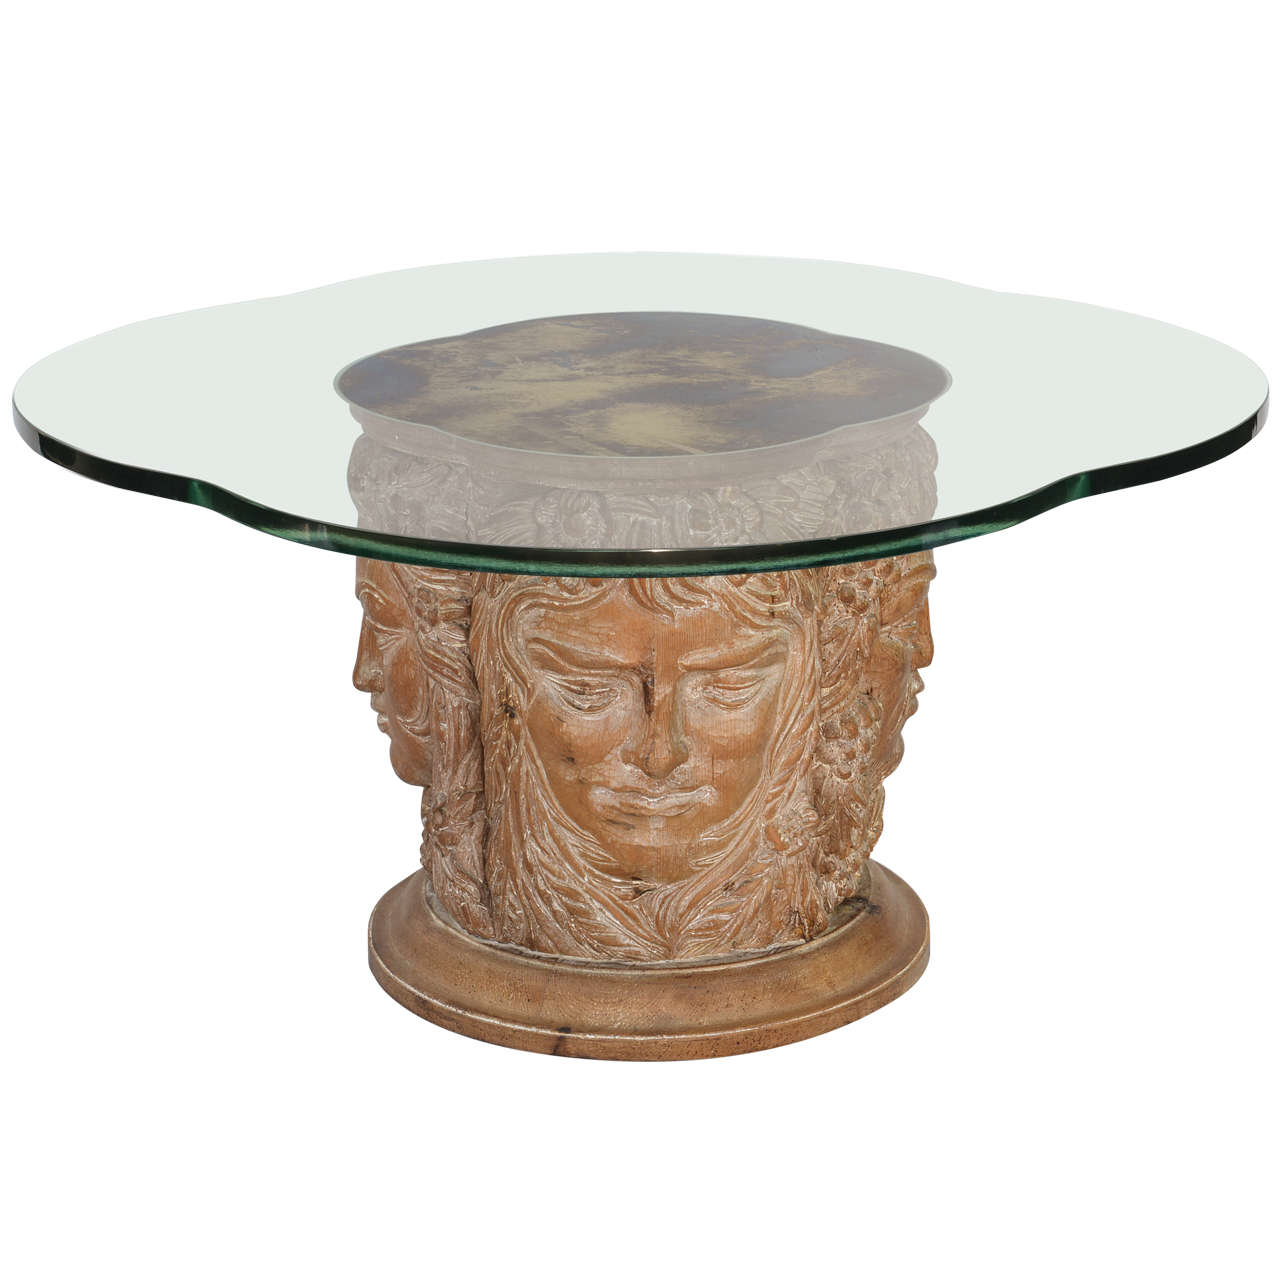 Four Seasons Cocktail Tables im Angebot